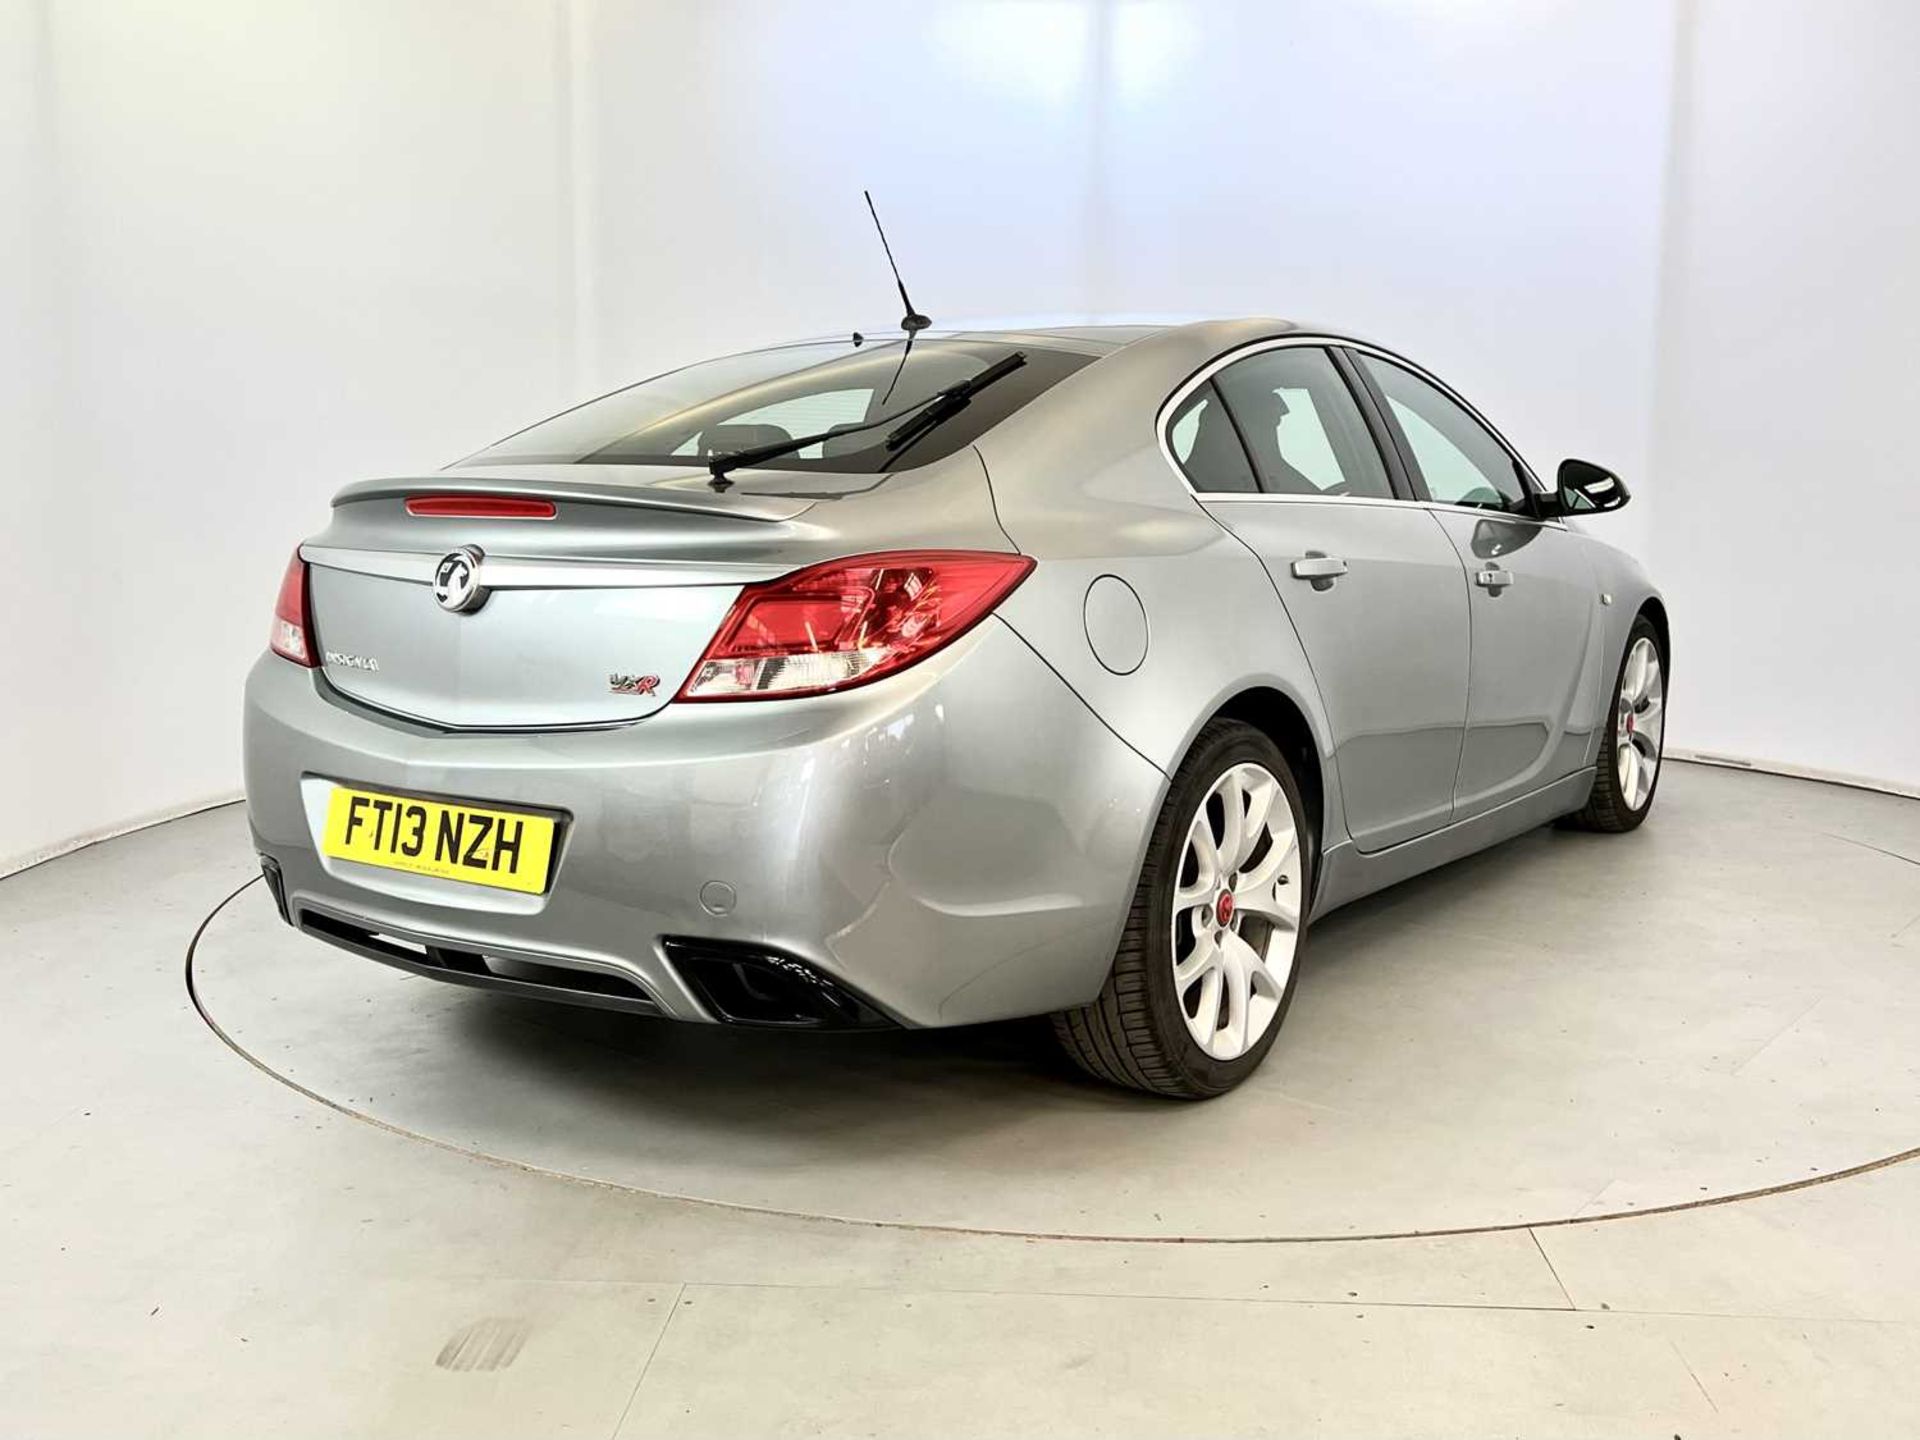 2013 Vauxhall Insignia VXR Supersport - Image 9 of 35